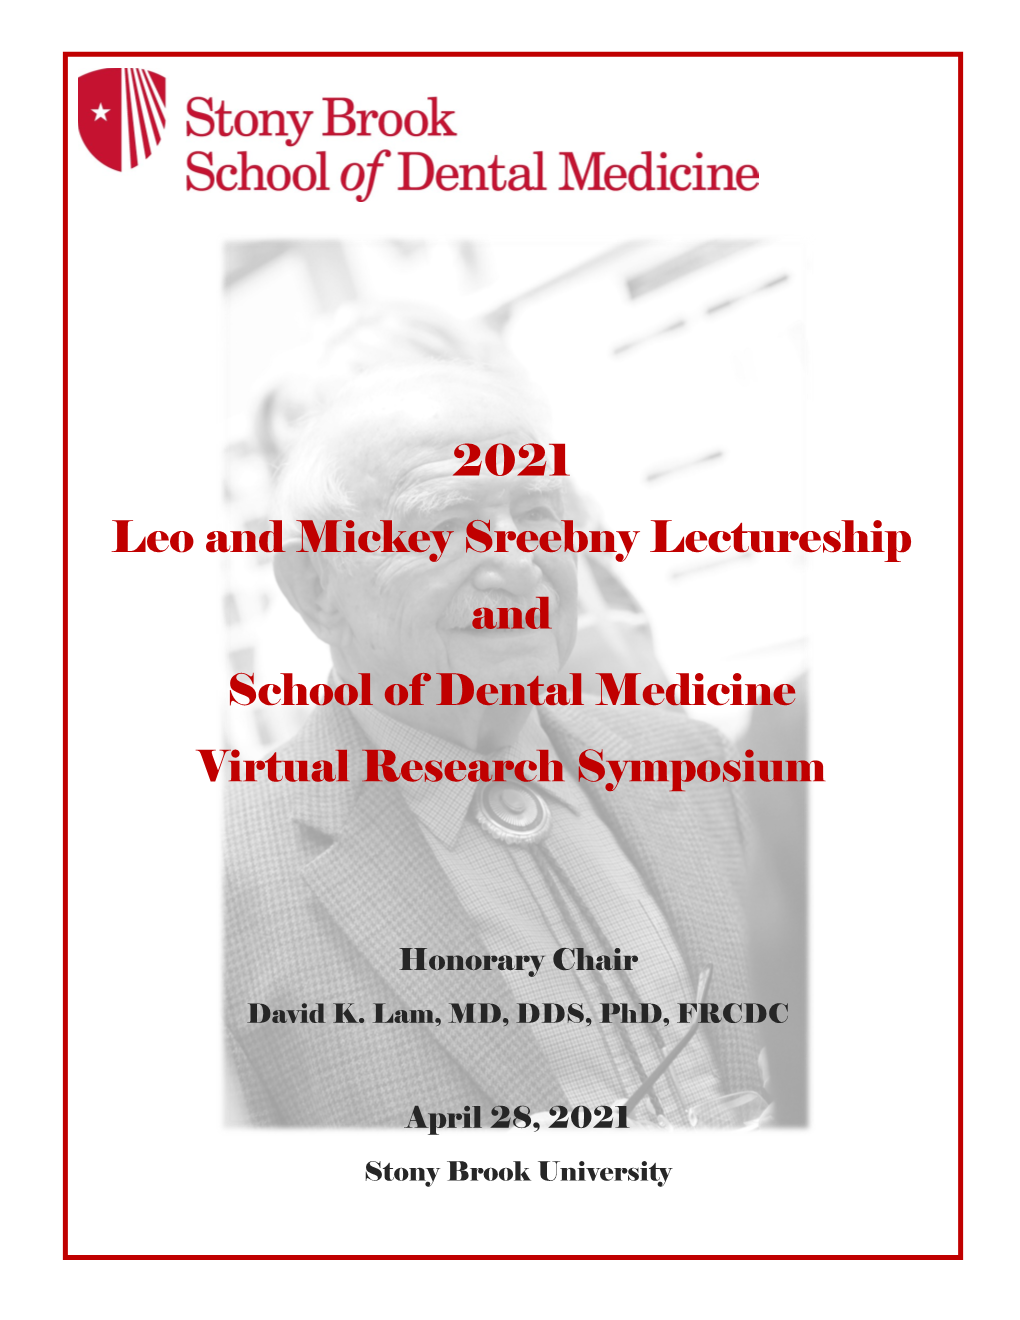 2021 Leo and Mickey Sreebny Lectureship and School of Dental Medicine Virtual Research Symposium